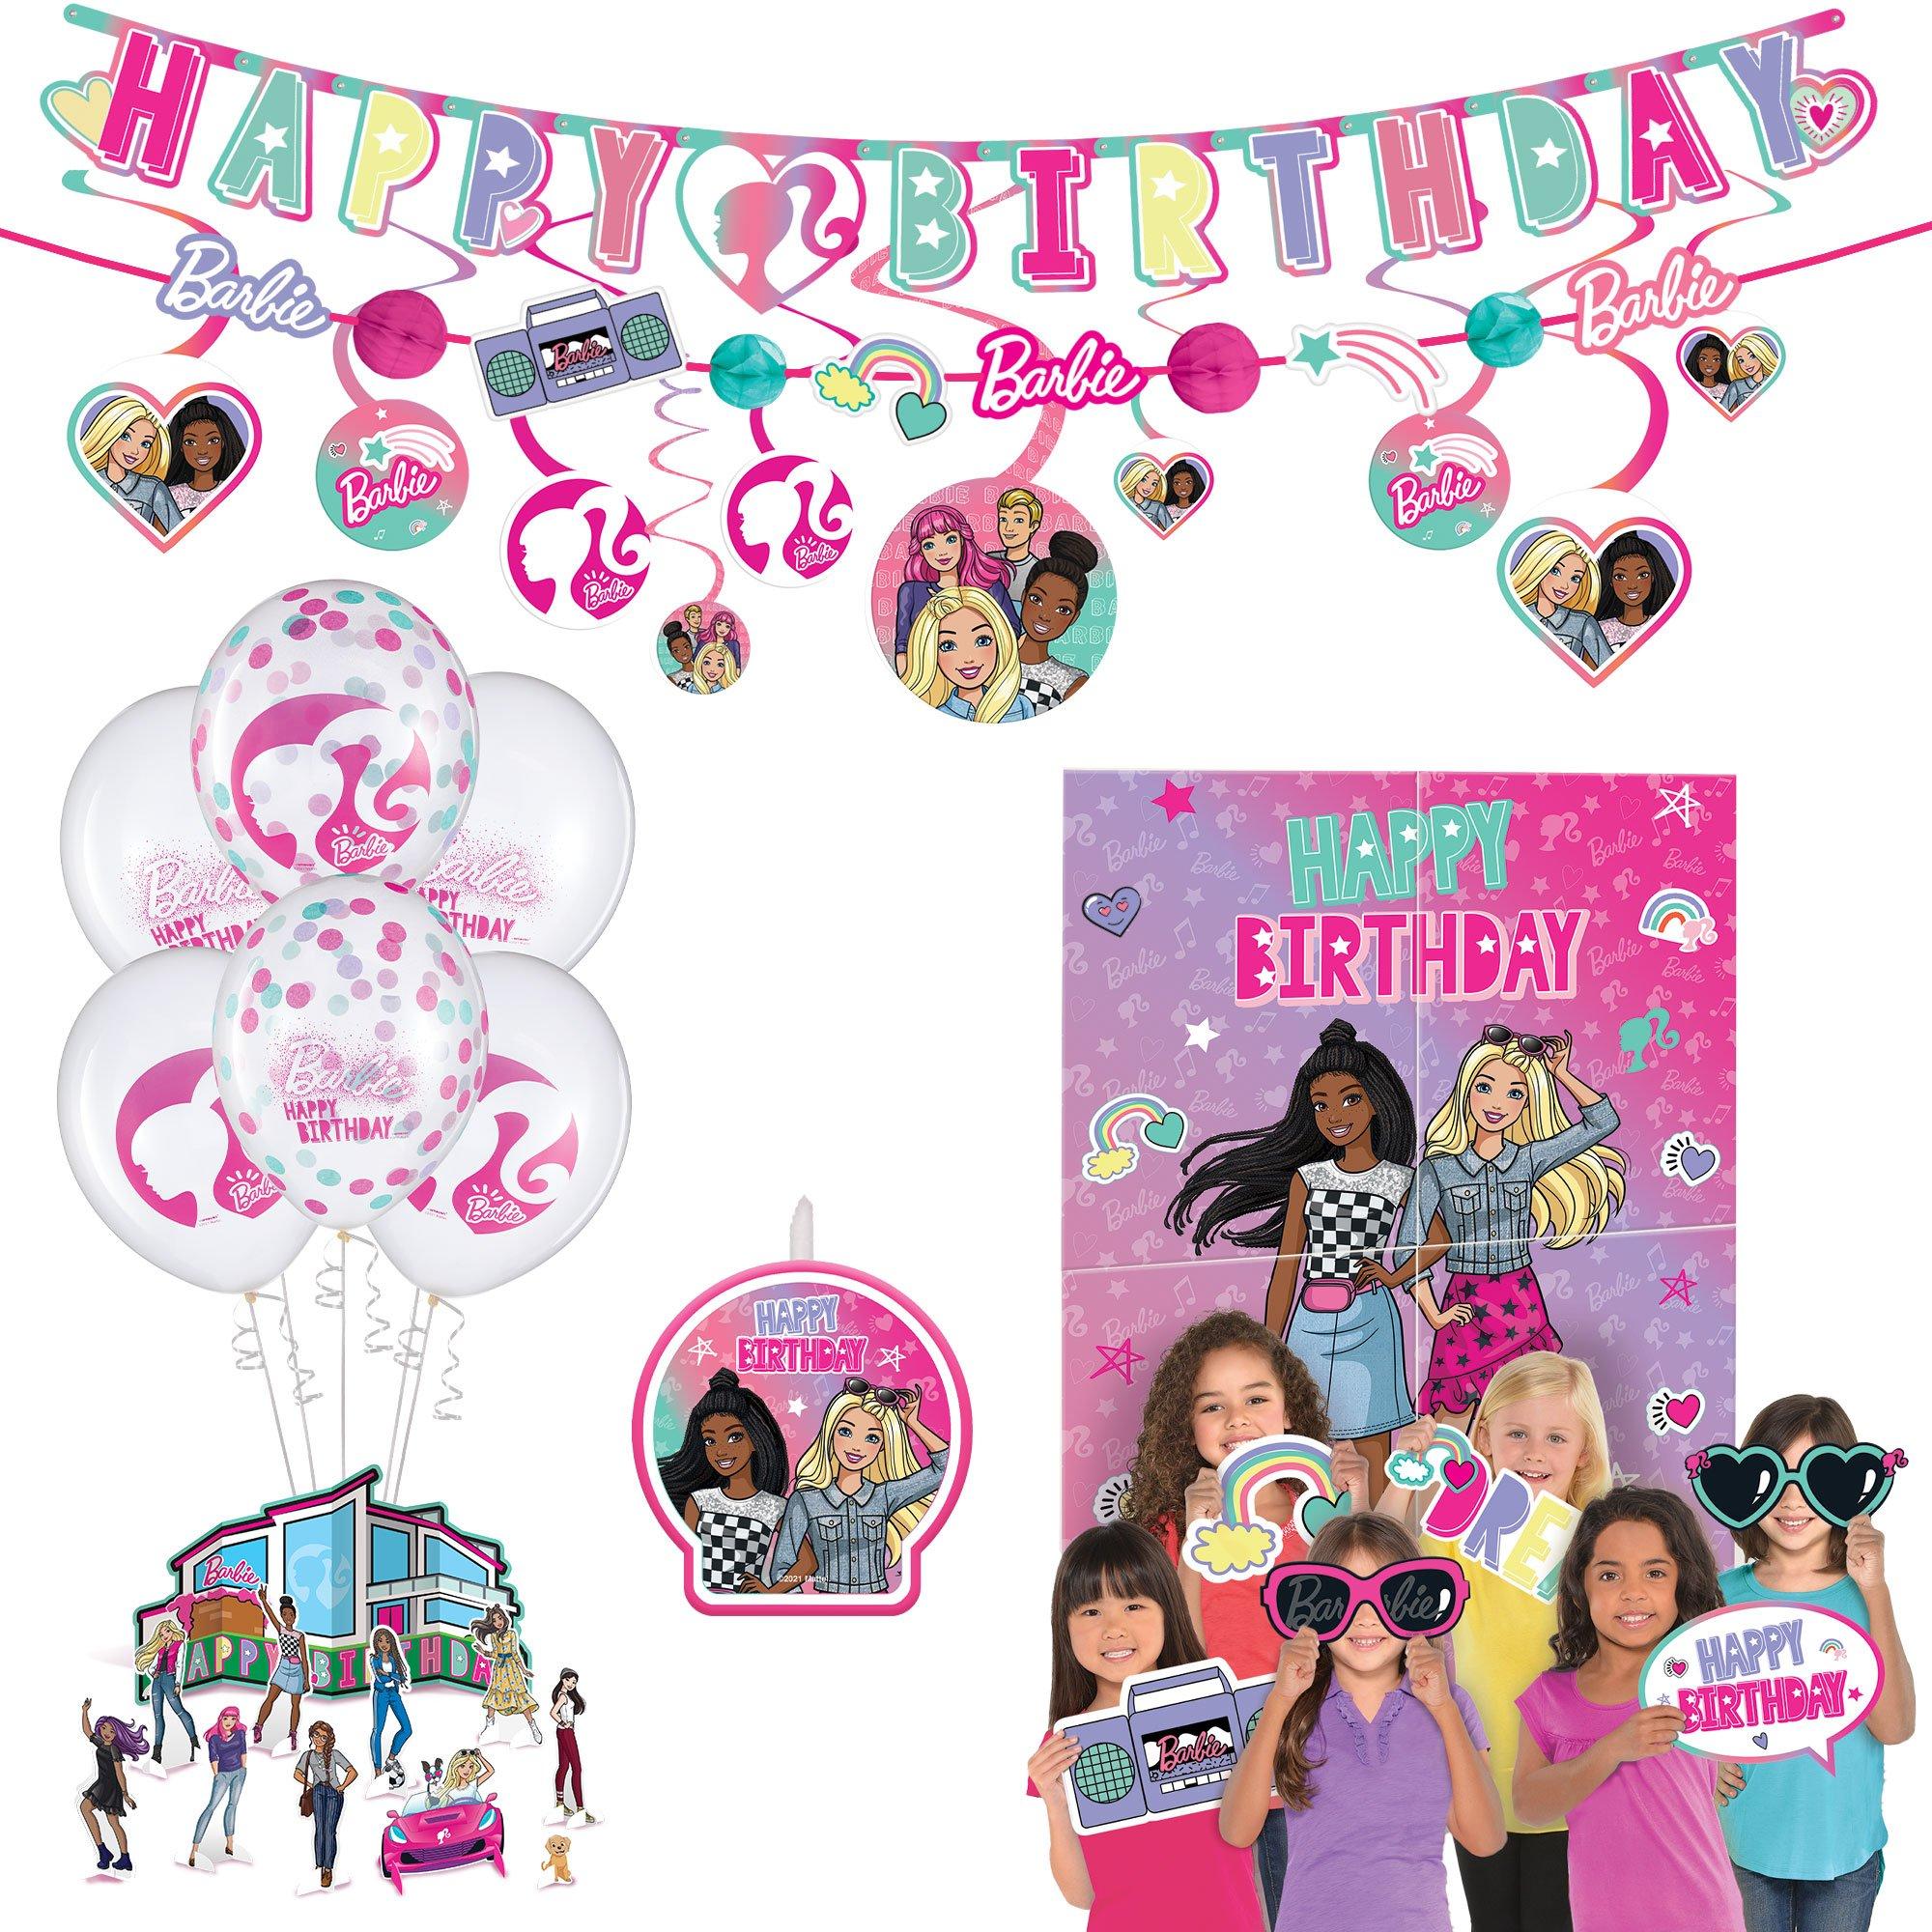 Barbie Dream Together Birthday Party Decorating Supplies Pack - Kit Includes Banners, Table Decorations, Scene Setter, Photo Props, Candle & Latex Confetti Balloons